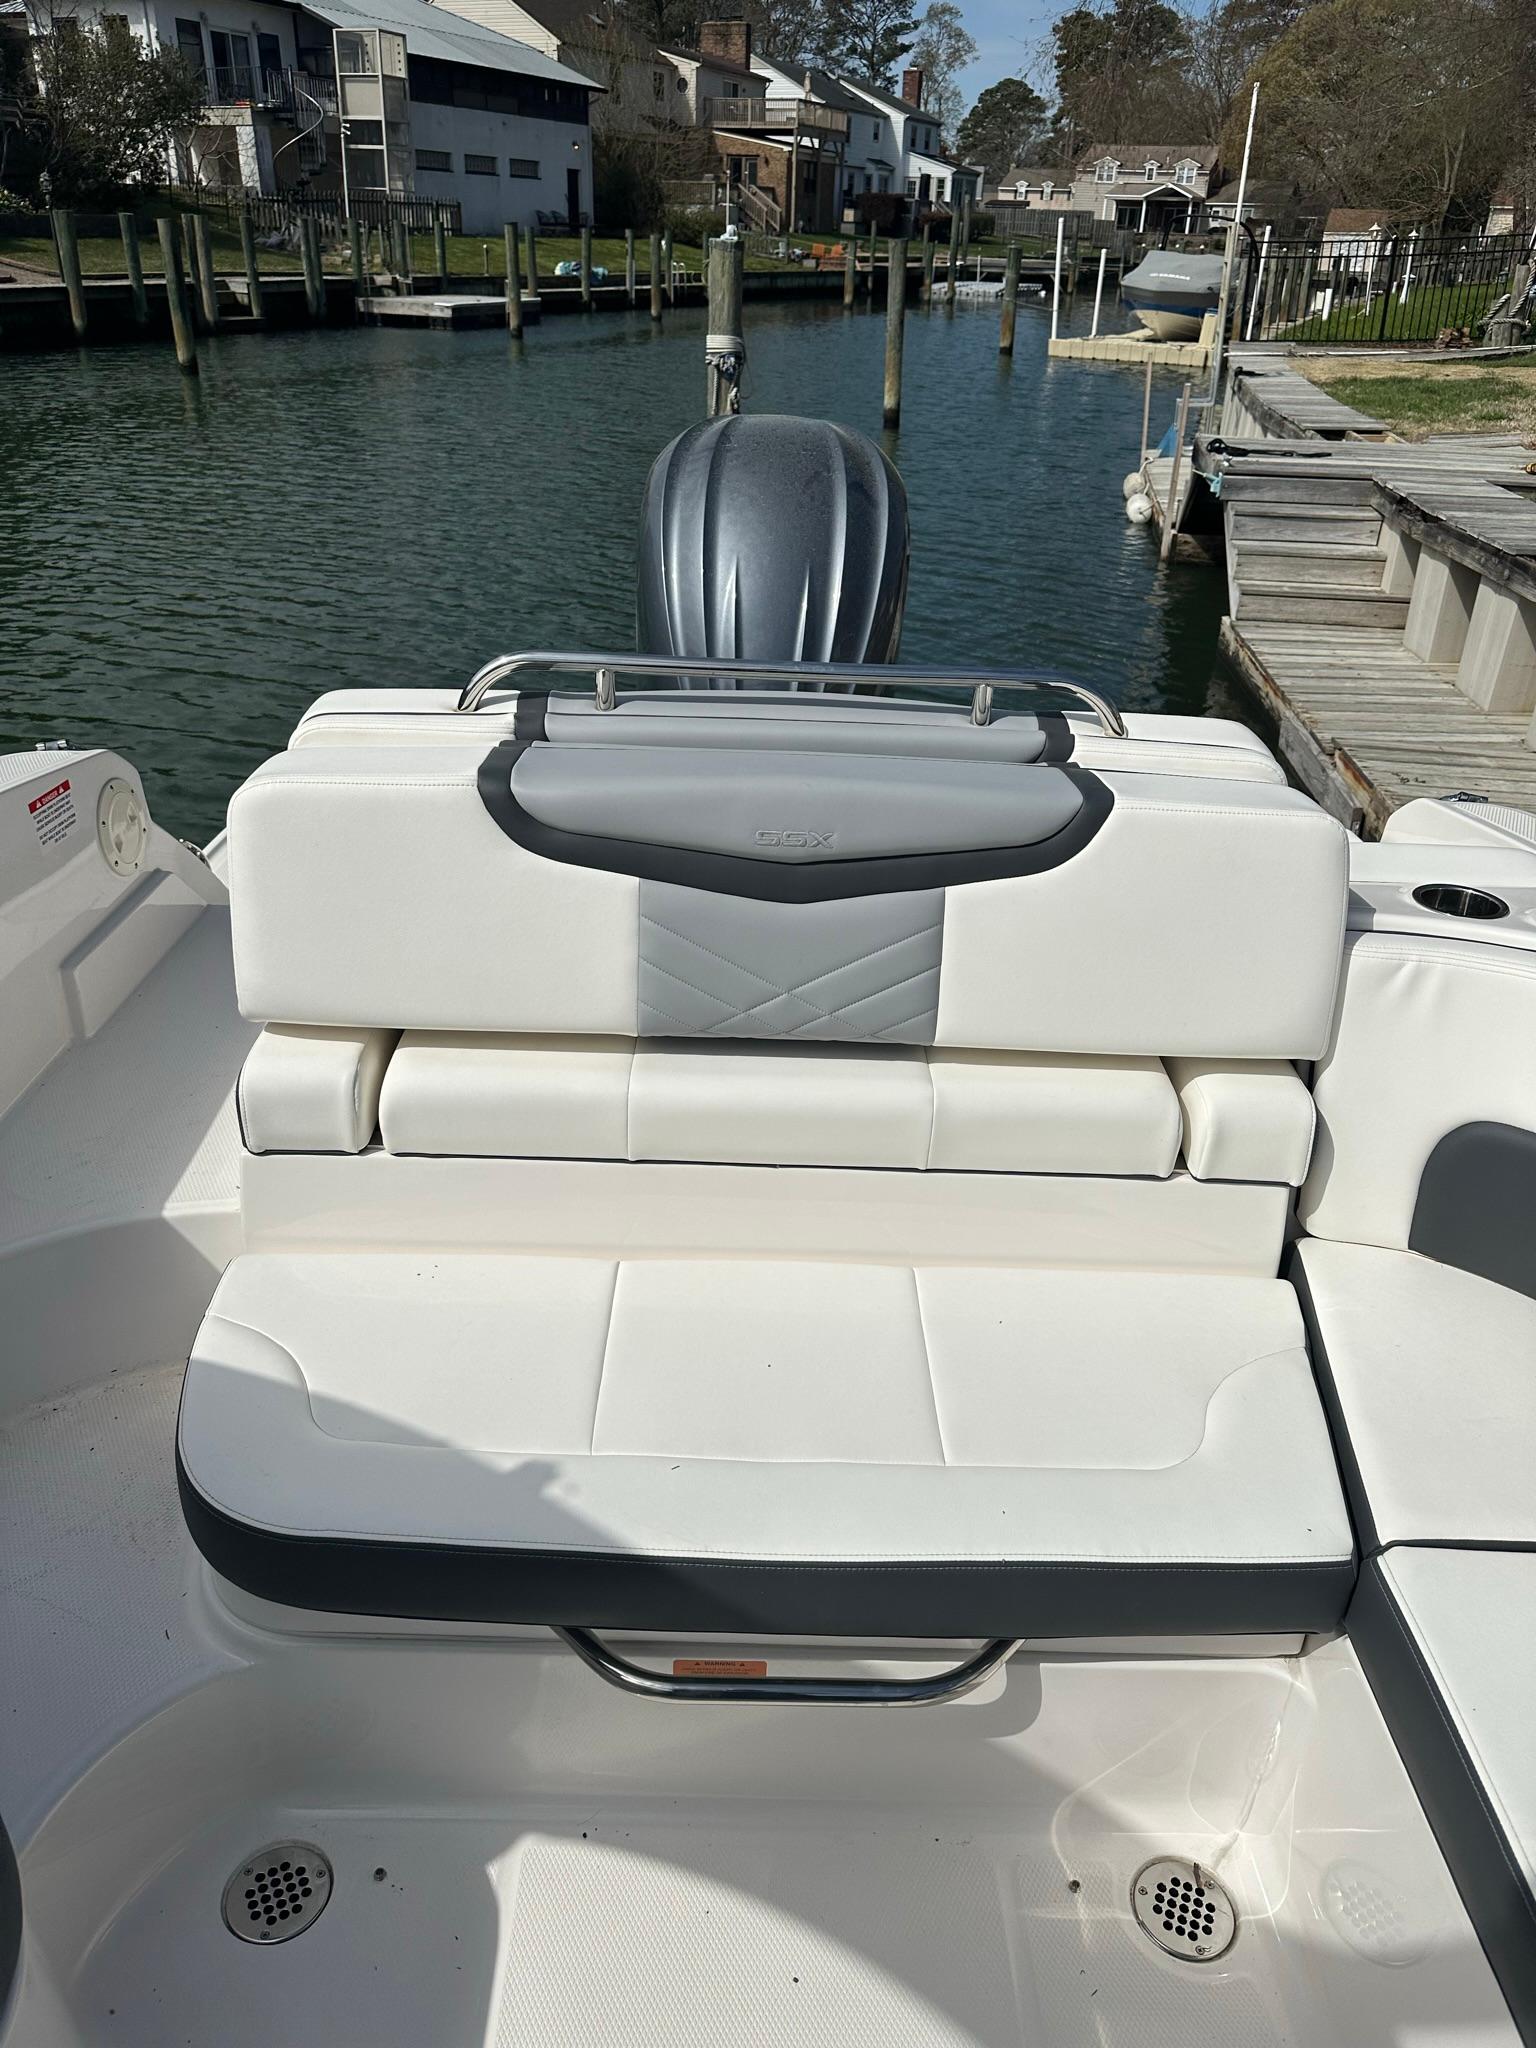 2022 Chaparral 267ssx OB, forward facing stern seat